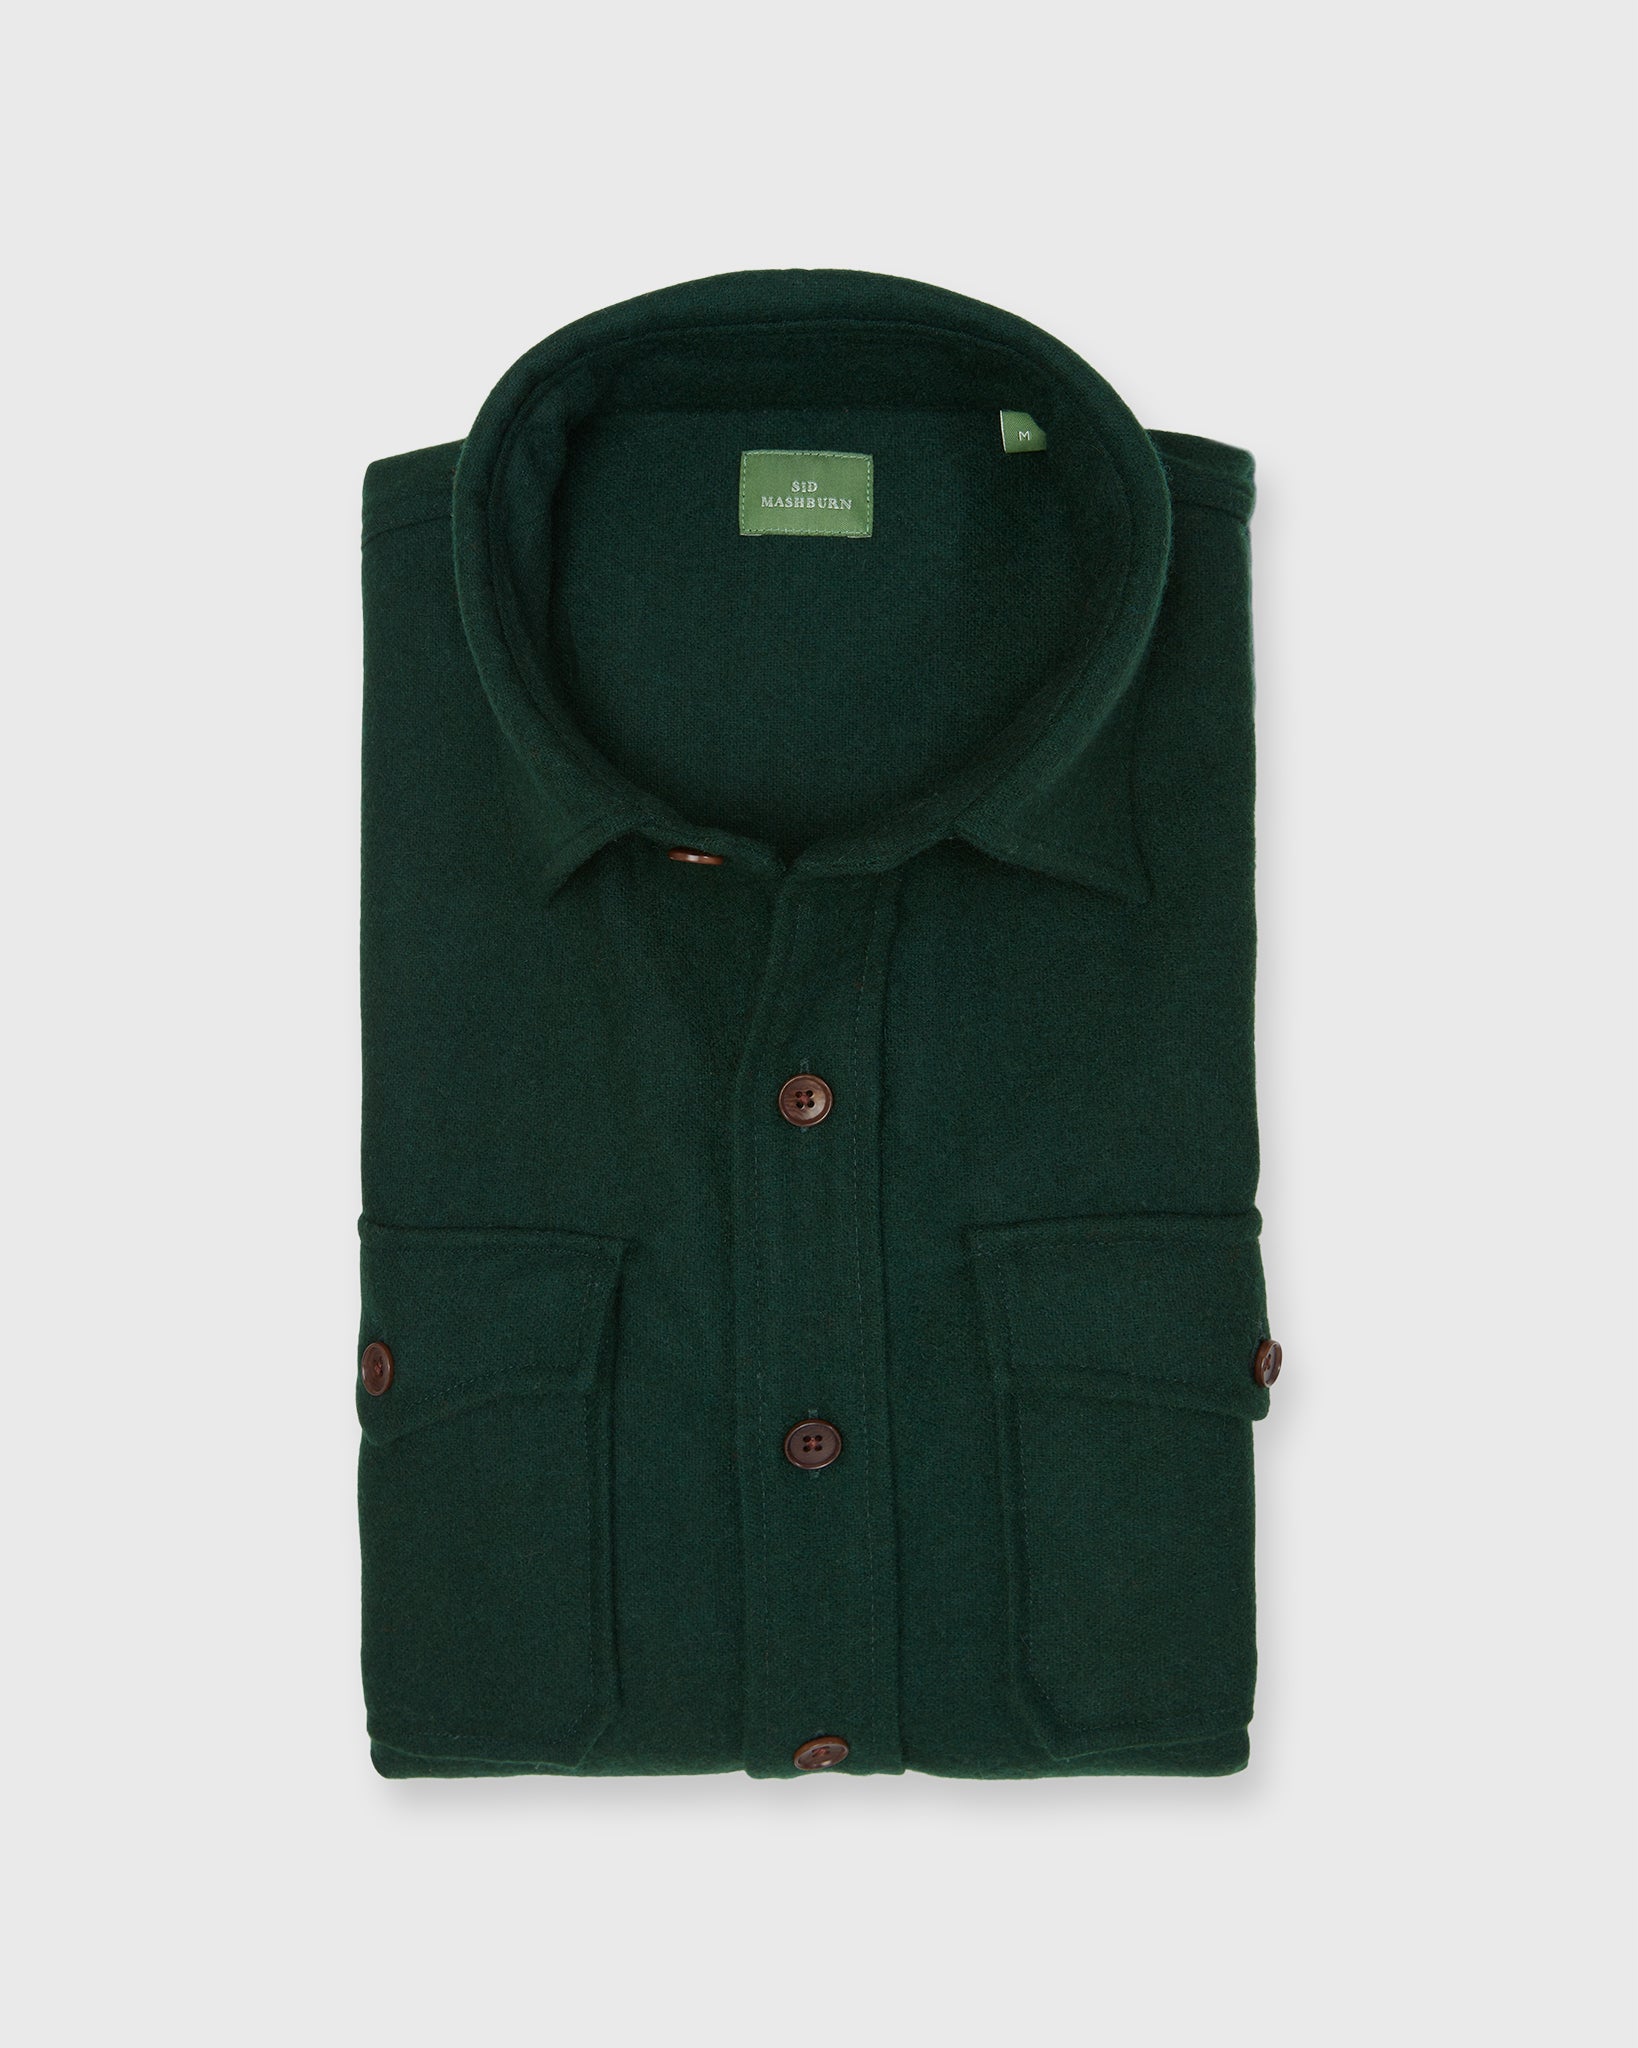 CPO Shirt in Forest Wool Melton